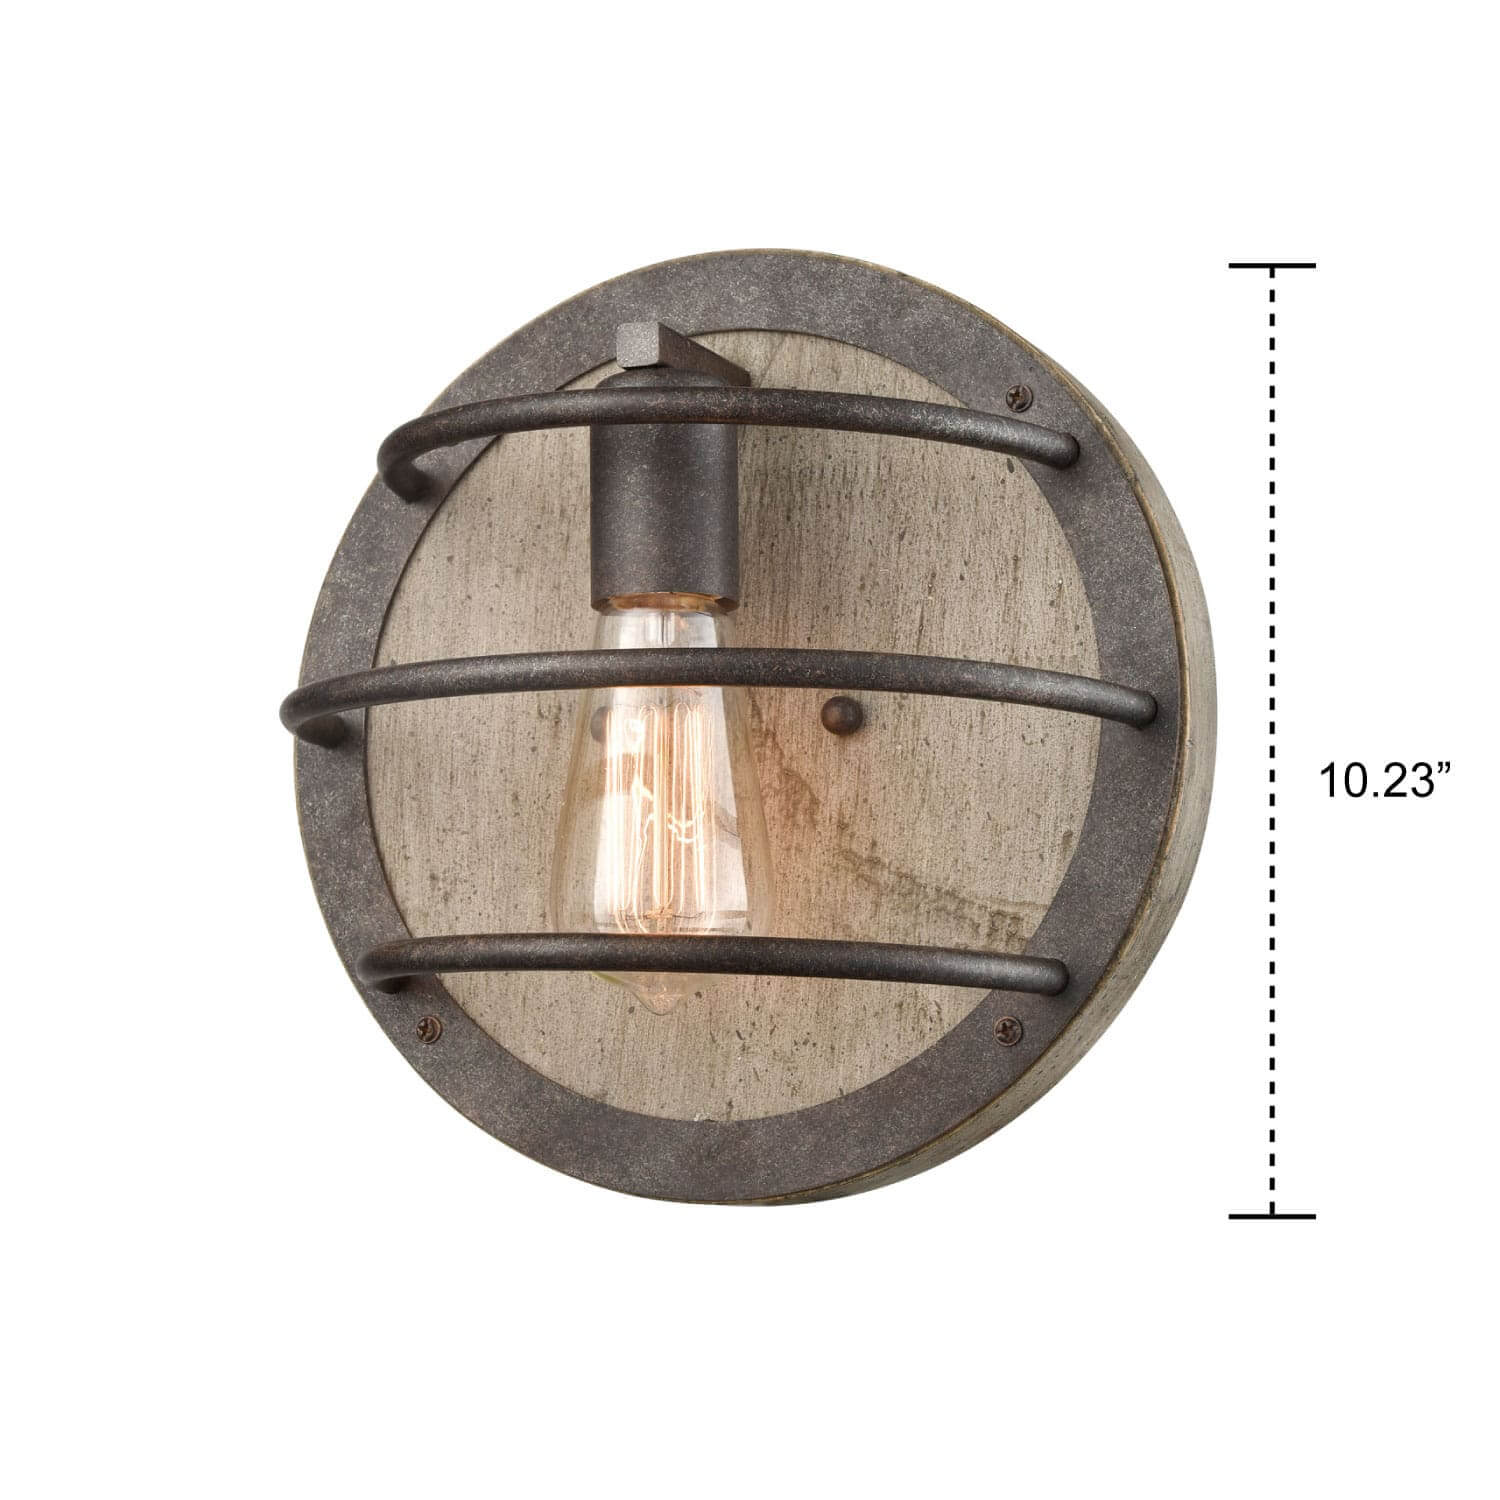 Farmhouse Wall Sconce with Wooden Round Shade Rust Finish